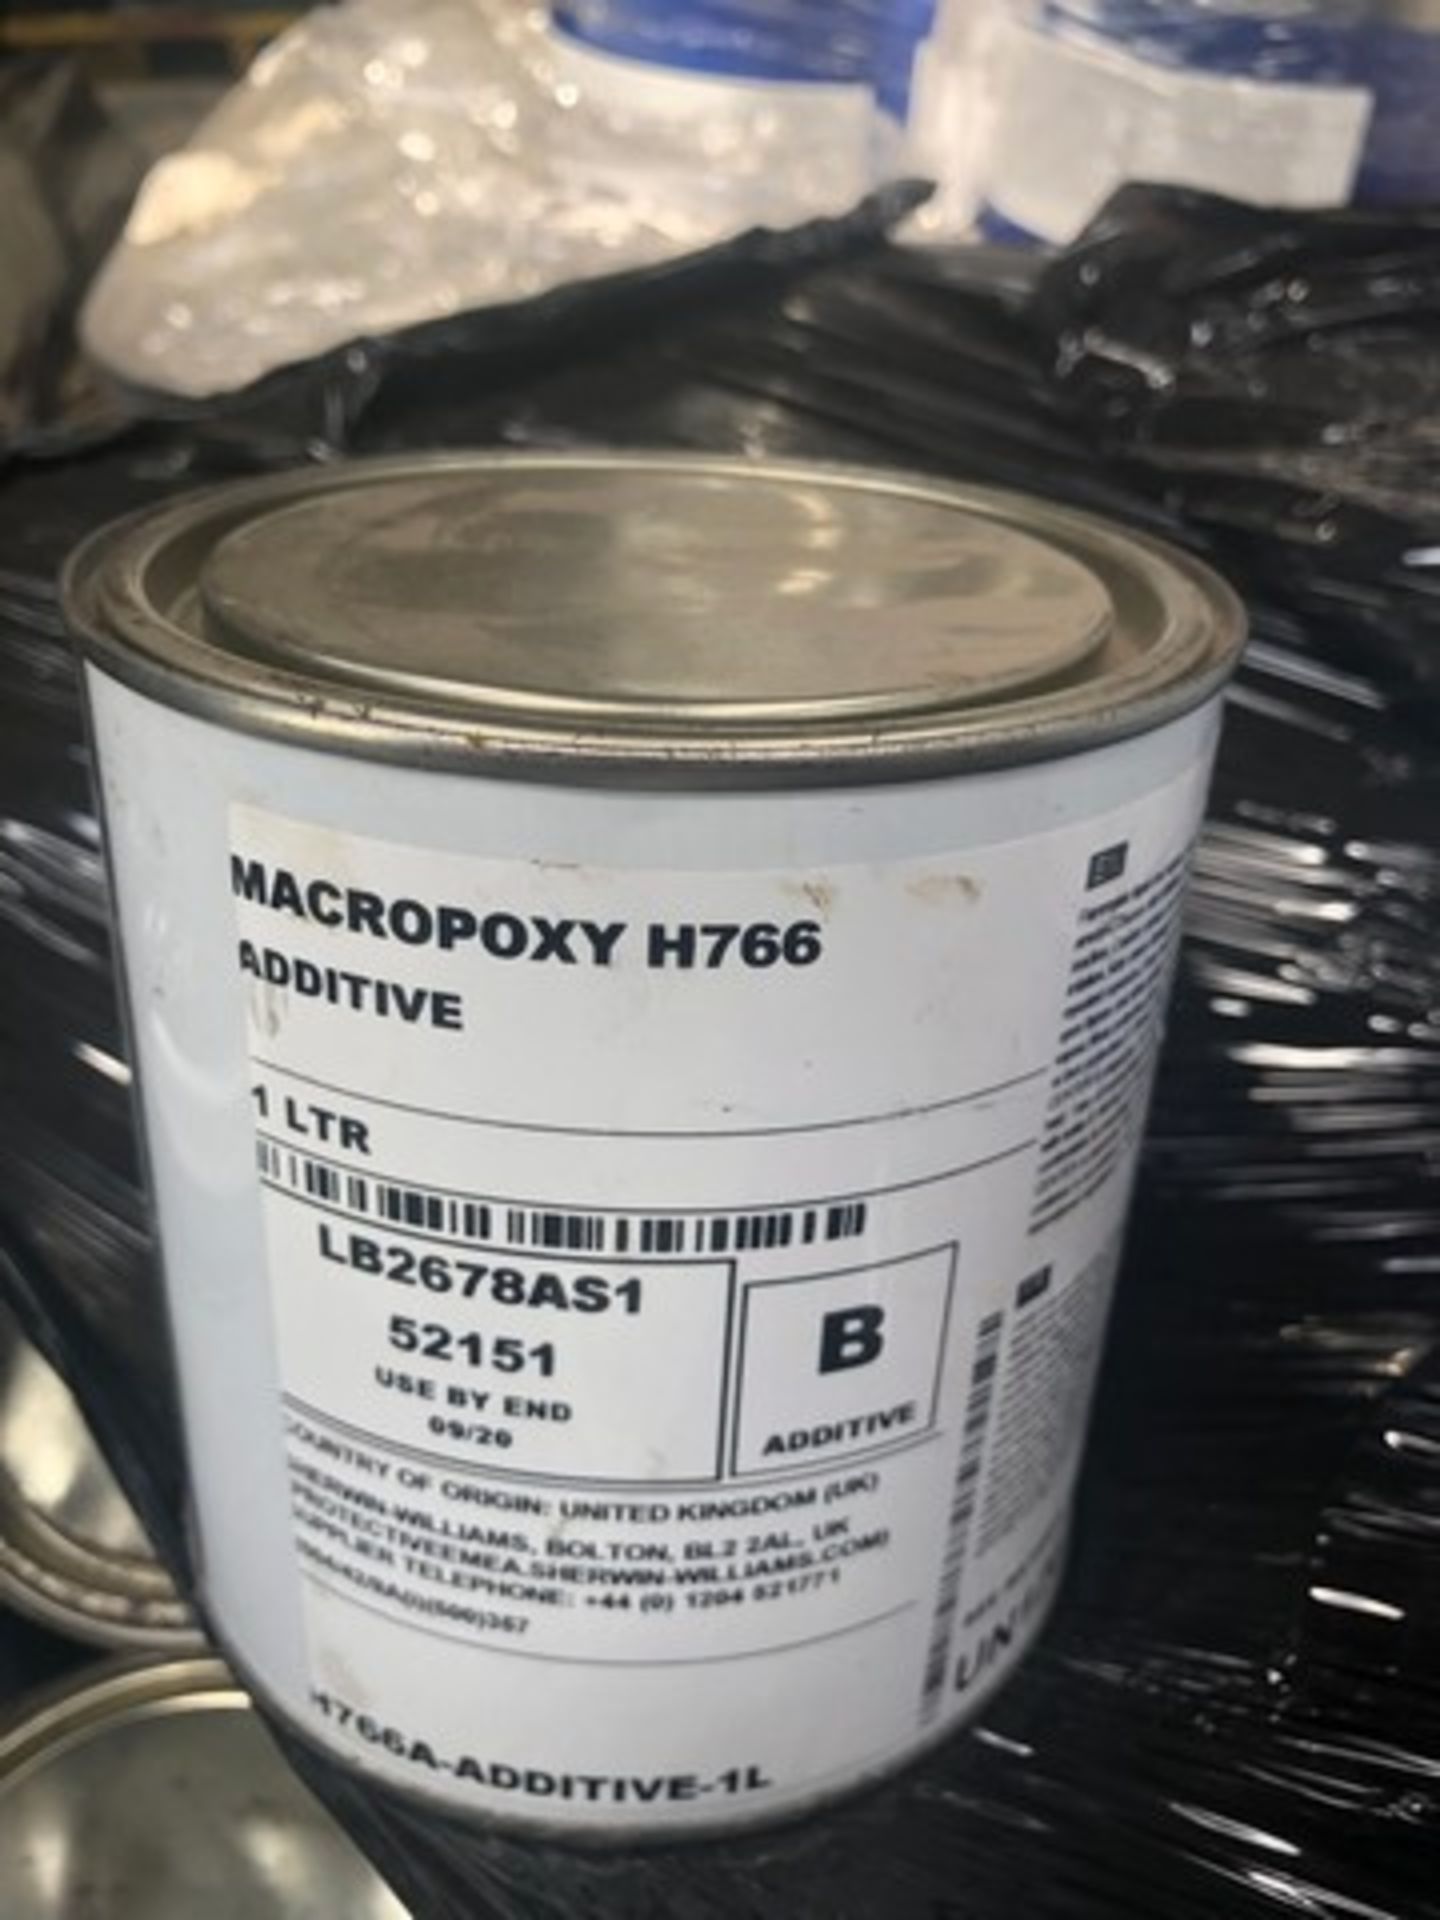 Mixed pallet of Sherwin Williams macropoxy M630V2 water based epoxy, macropoxy H766 additive approx - Image 3 of 3